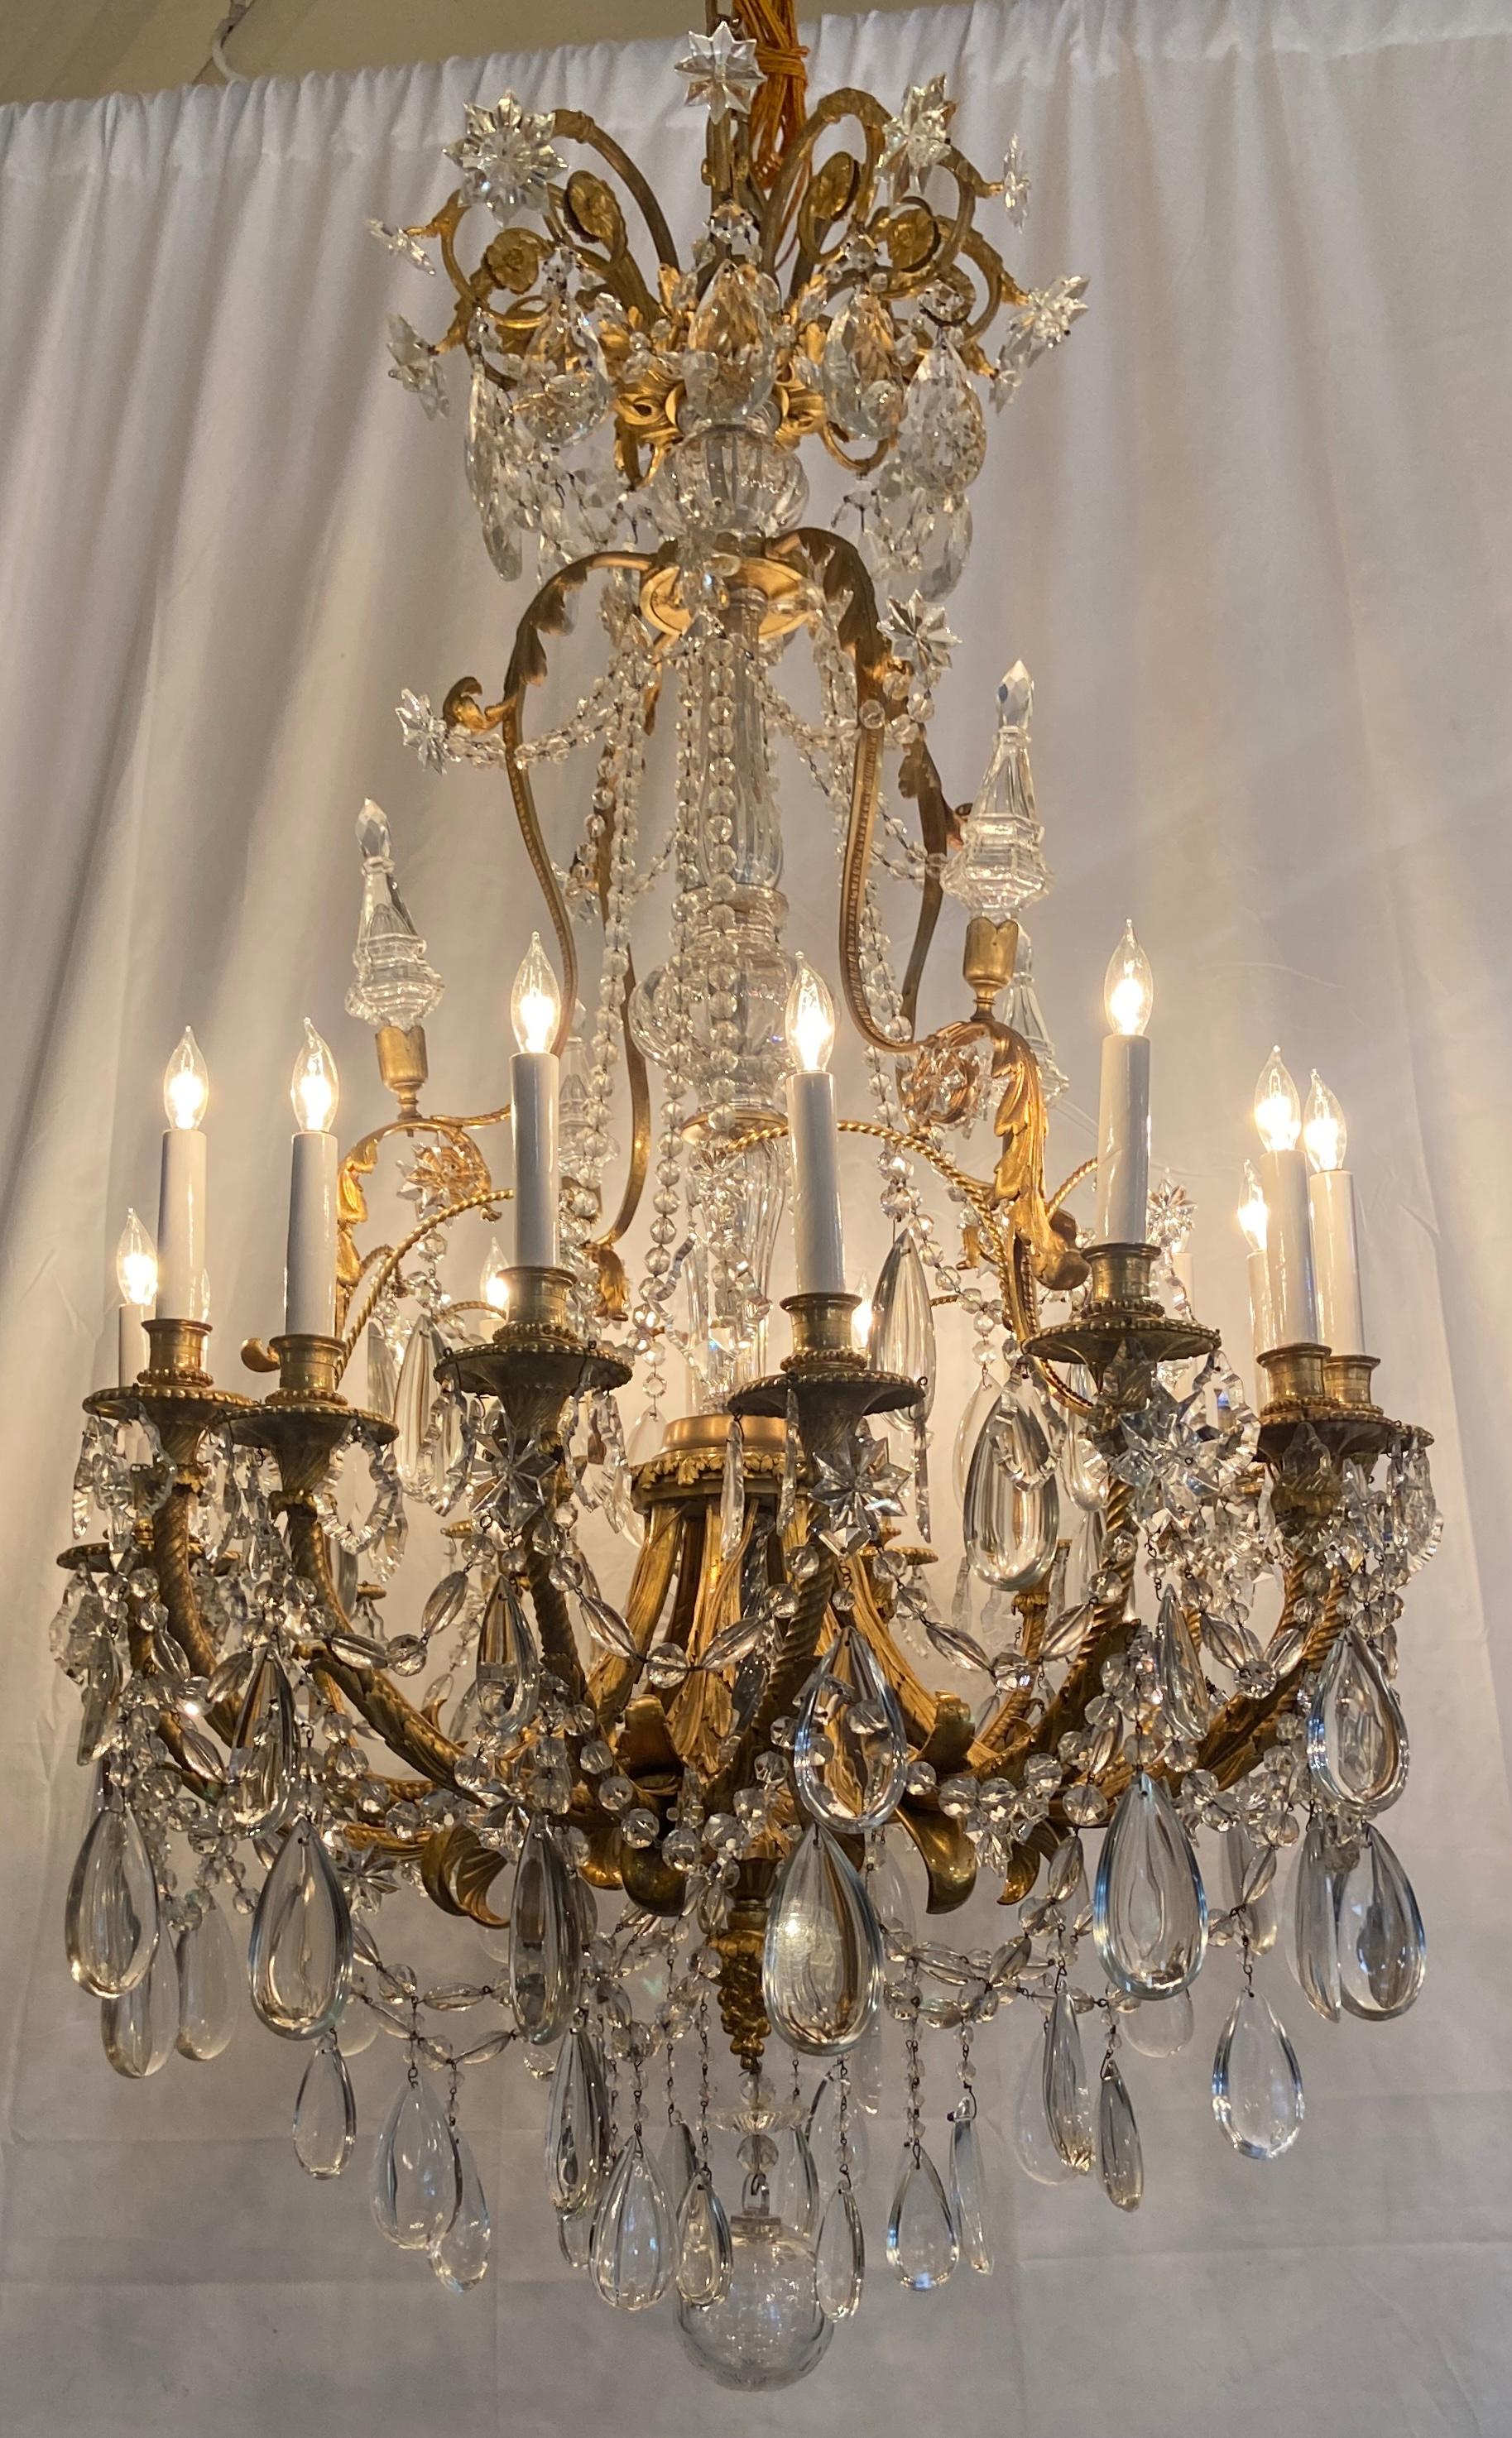 Antique French Ormolu Bronze and Baccarat Crystal Chandelier, Circa 1860 For Sale 1